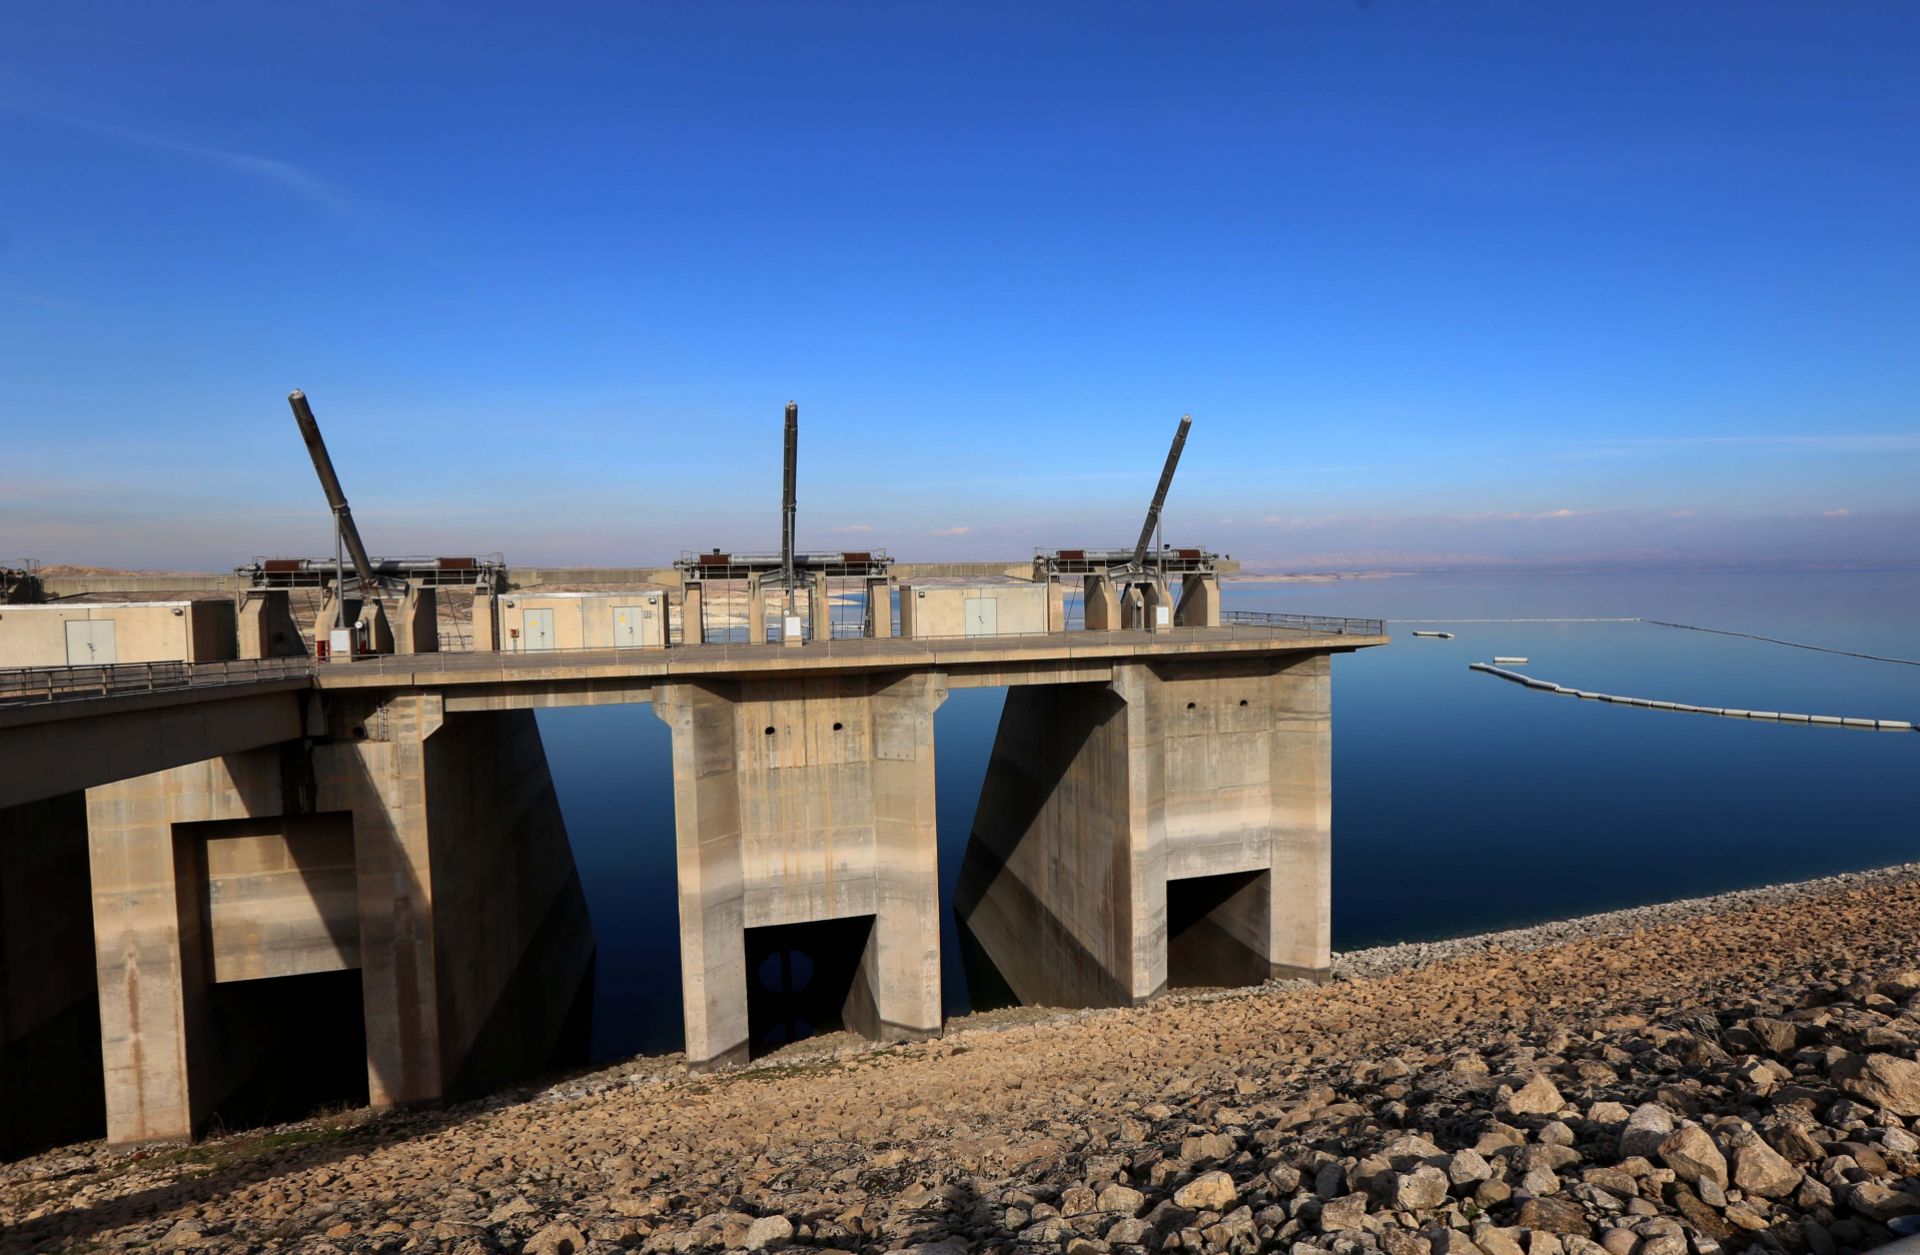 The Mosul Dam, Iraq's largest, provides water and electricity to millions of Iraqis.